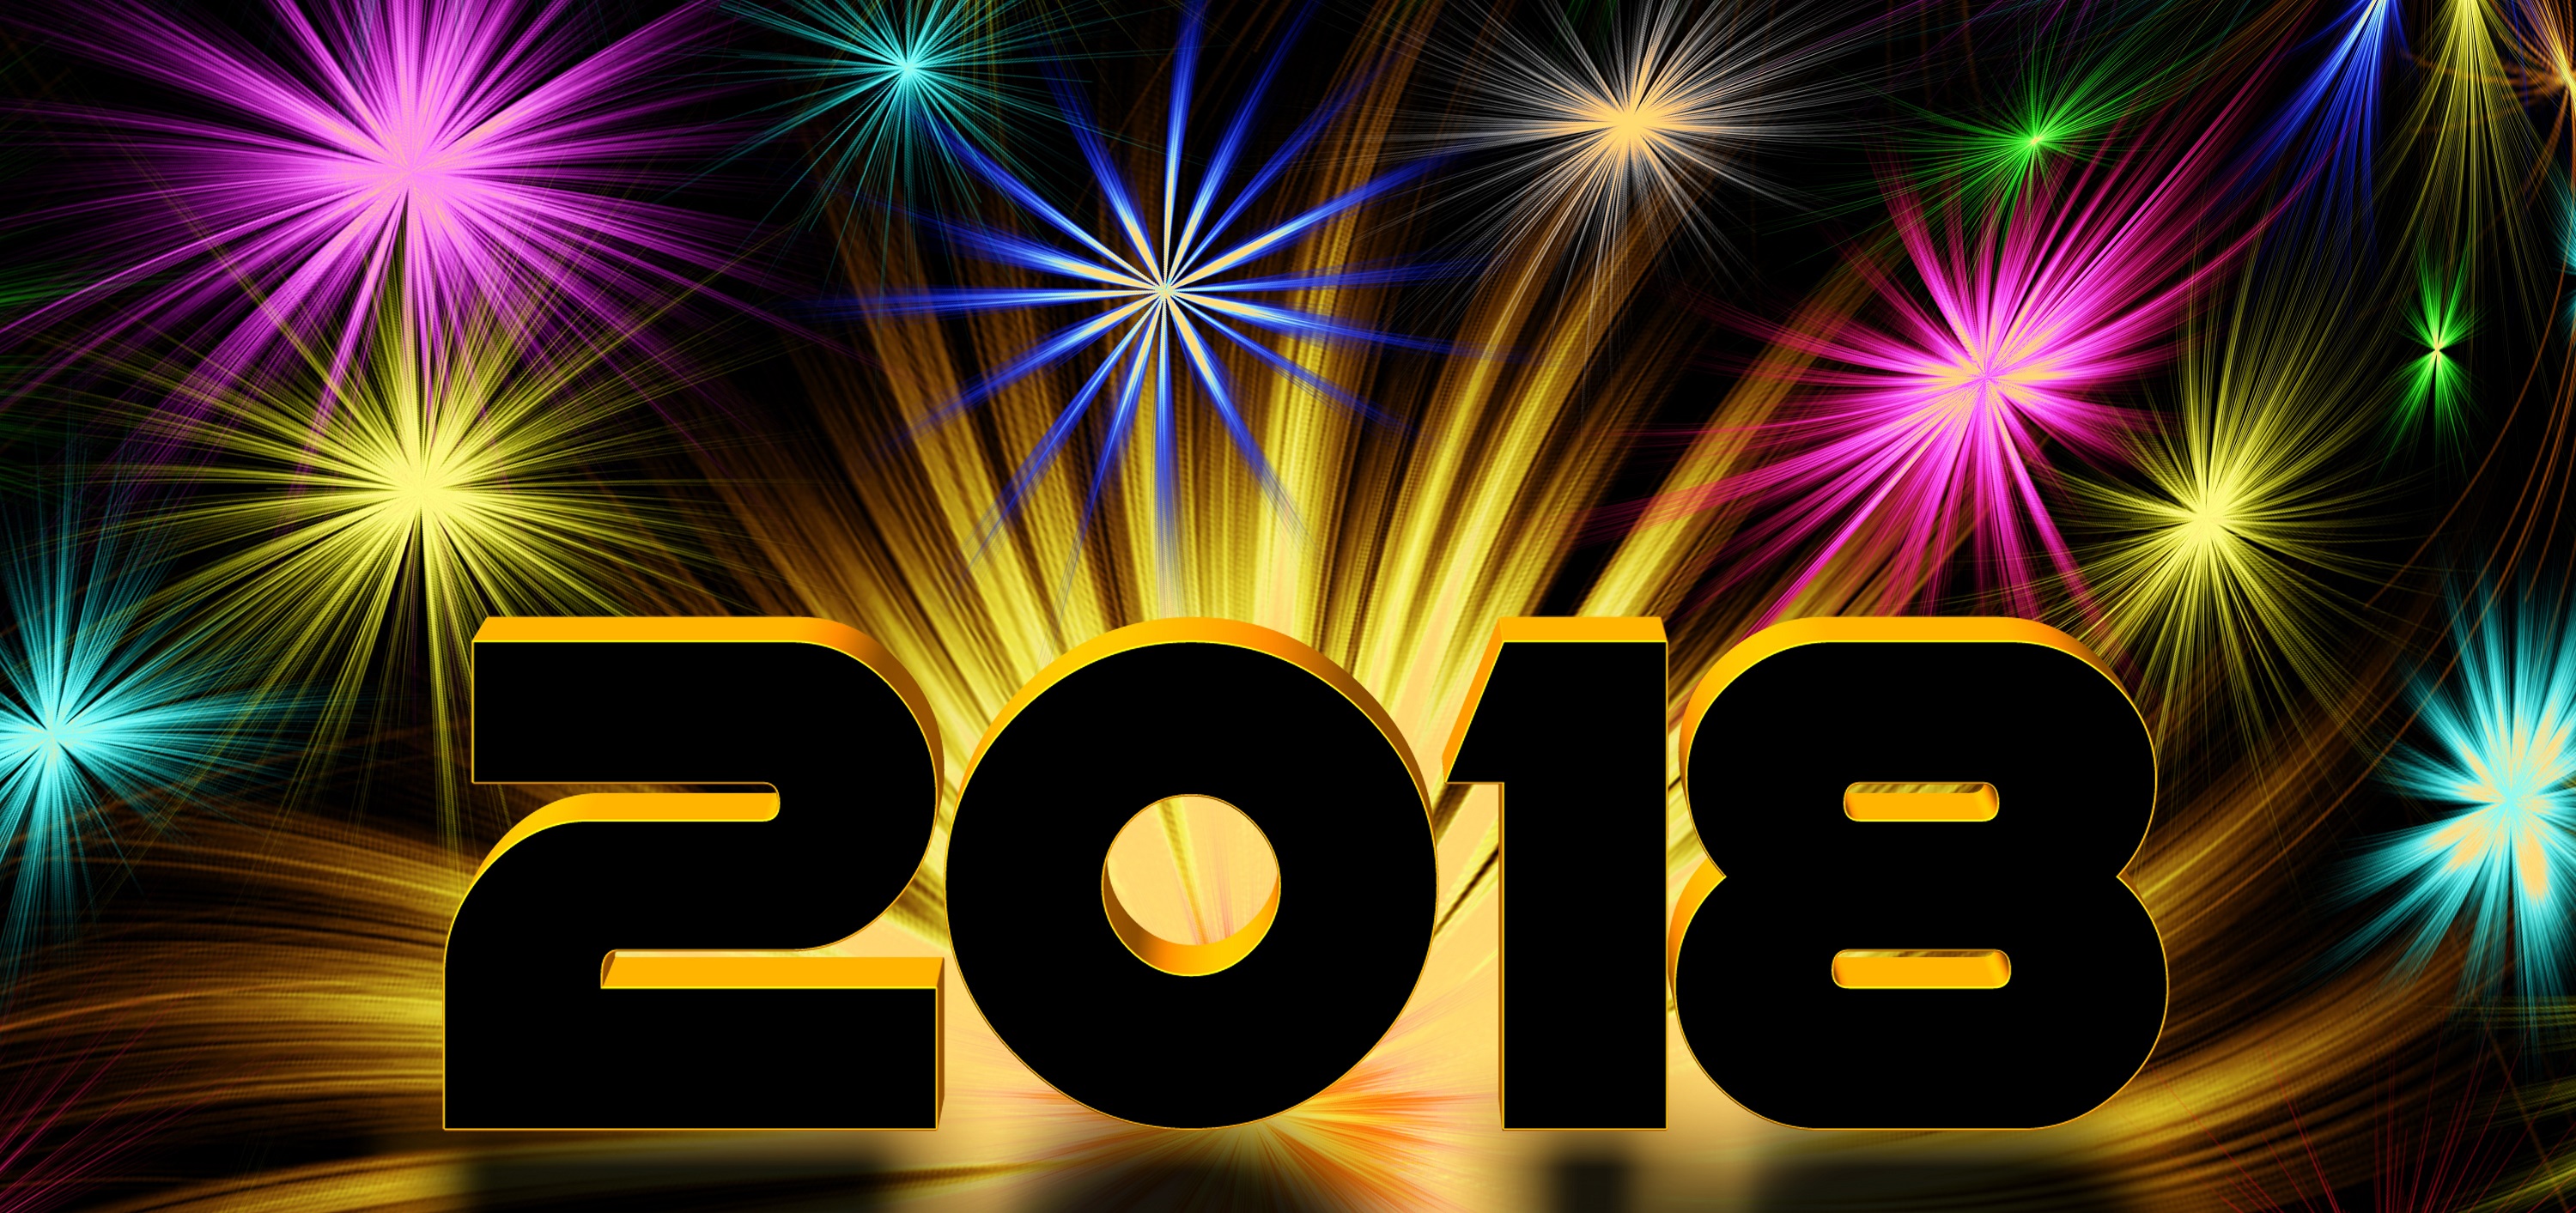 holiday, new year 2018, colorful, colors, new year